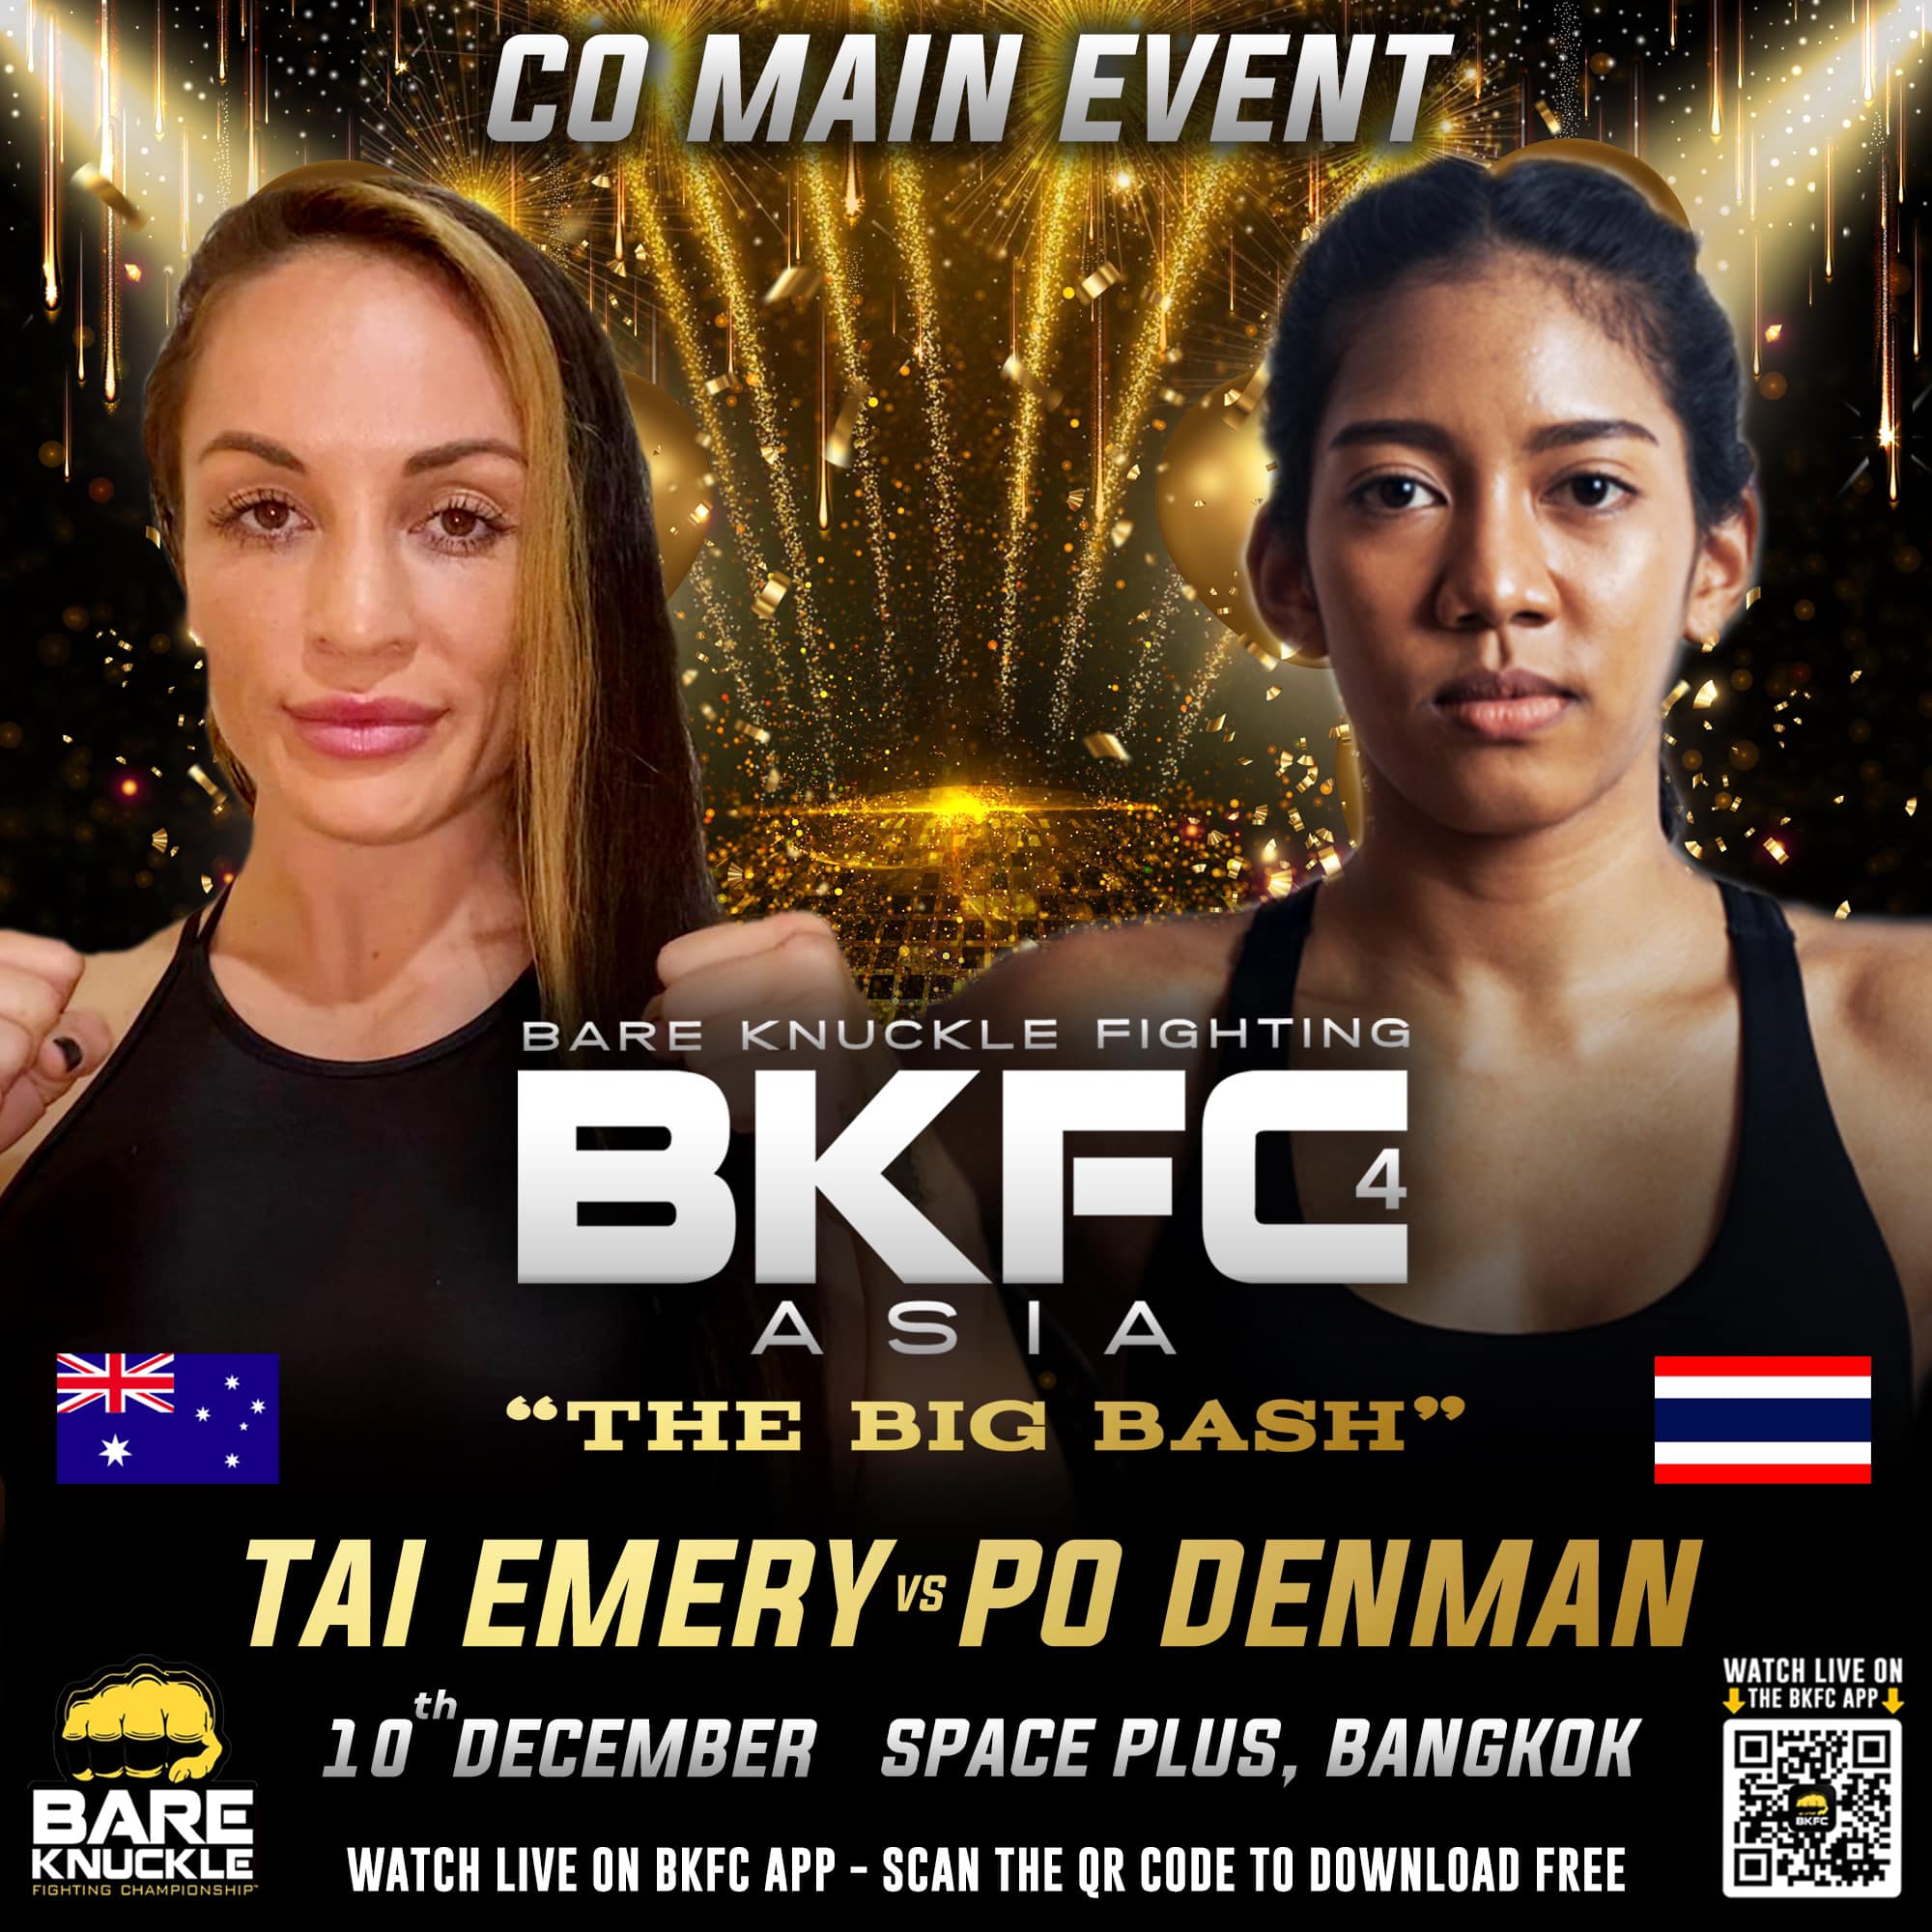 Po Denman vs Tai Emery BKFC 4 Bare Knuckle poster for the co main event